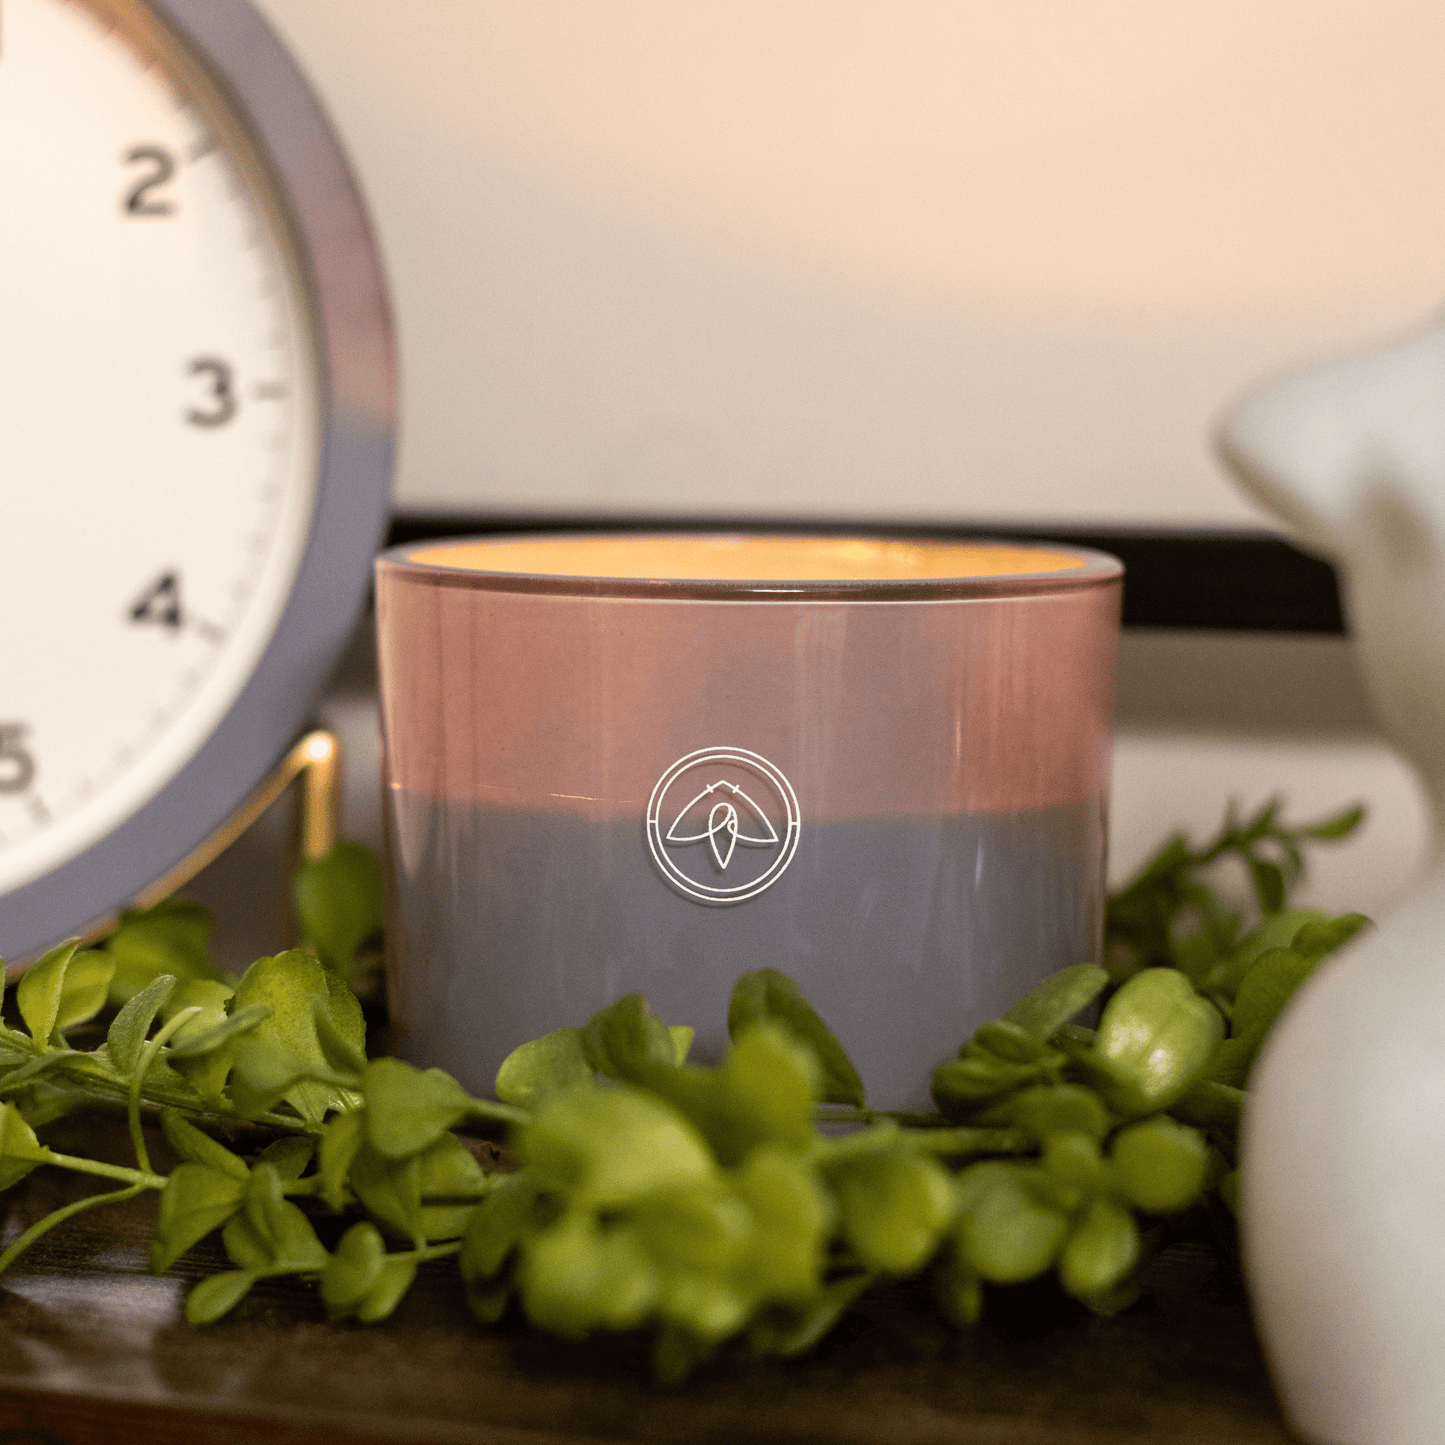 10oz Serenity two wick candle close up next to a clock and other home decor